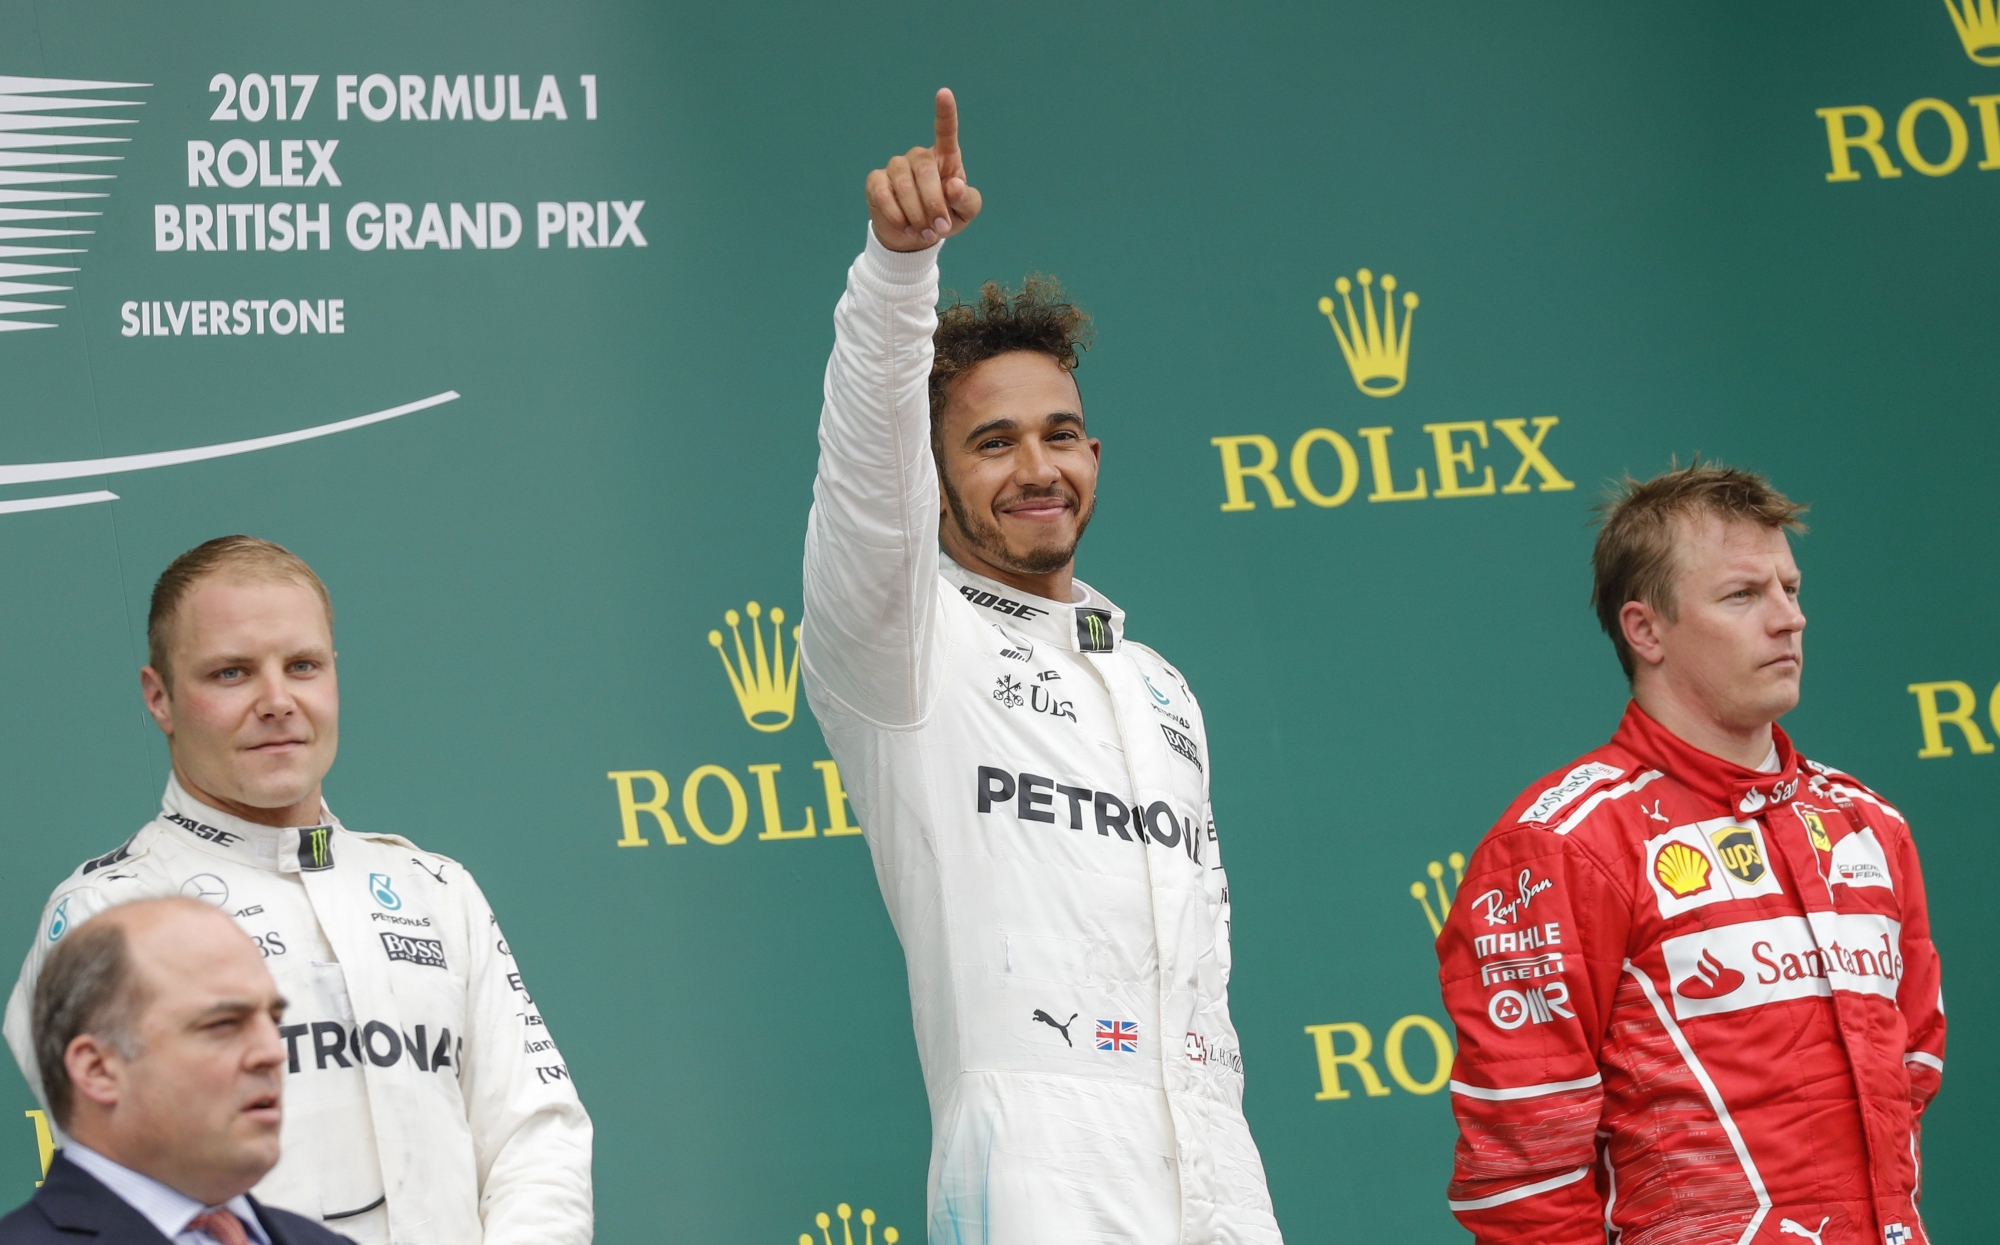 epa06091000 Winner British Formula One driver Lewis Hamilton (C) of Mercedes AMG GP celebrates on the podium next to his teammate, second placed, Finnish Formula One driver Valtteri Bottas (L) and third placed Finnish Formula One driver Kimi Raikkonen (R) of Scuderia Ferrari, after the Formula One Grand Prix of Great Britain at the Silverstone circuit, in Northamptonshire, Britain, 16 July 2017.  EPA/VALDRIN XHEMAJ